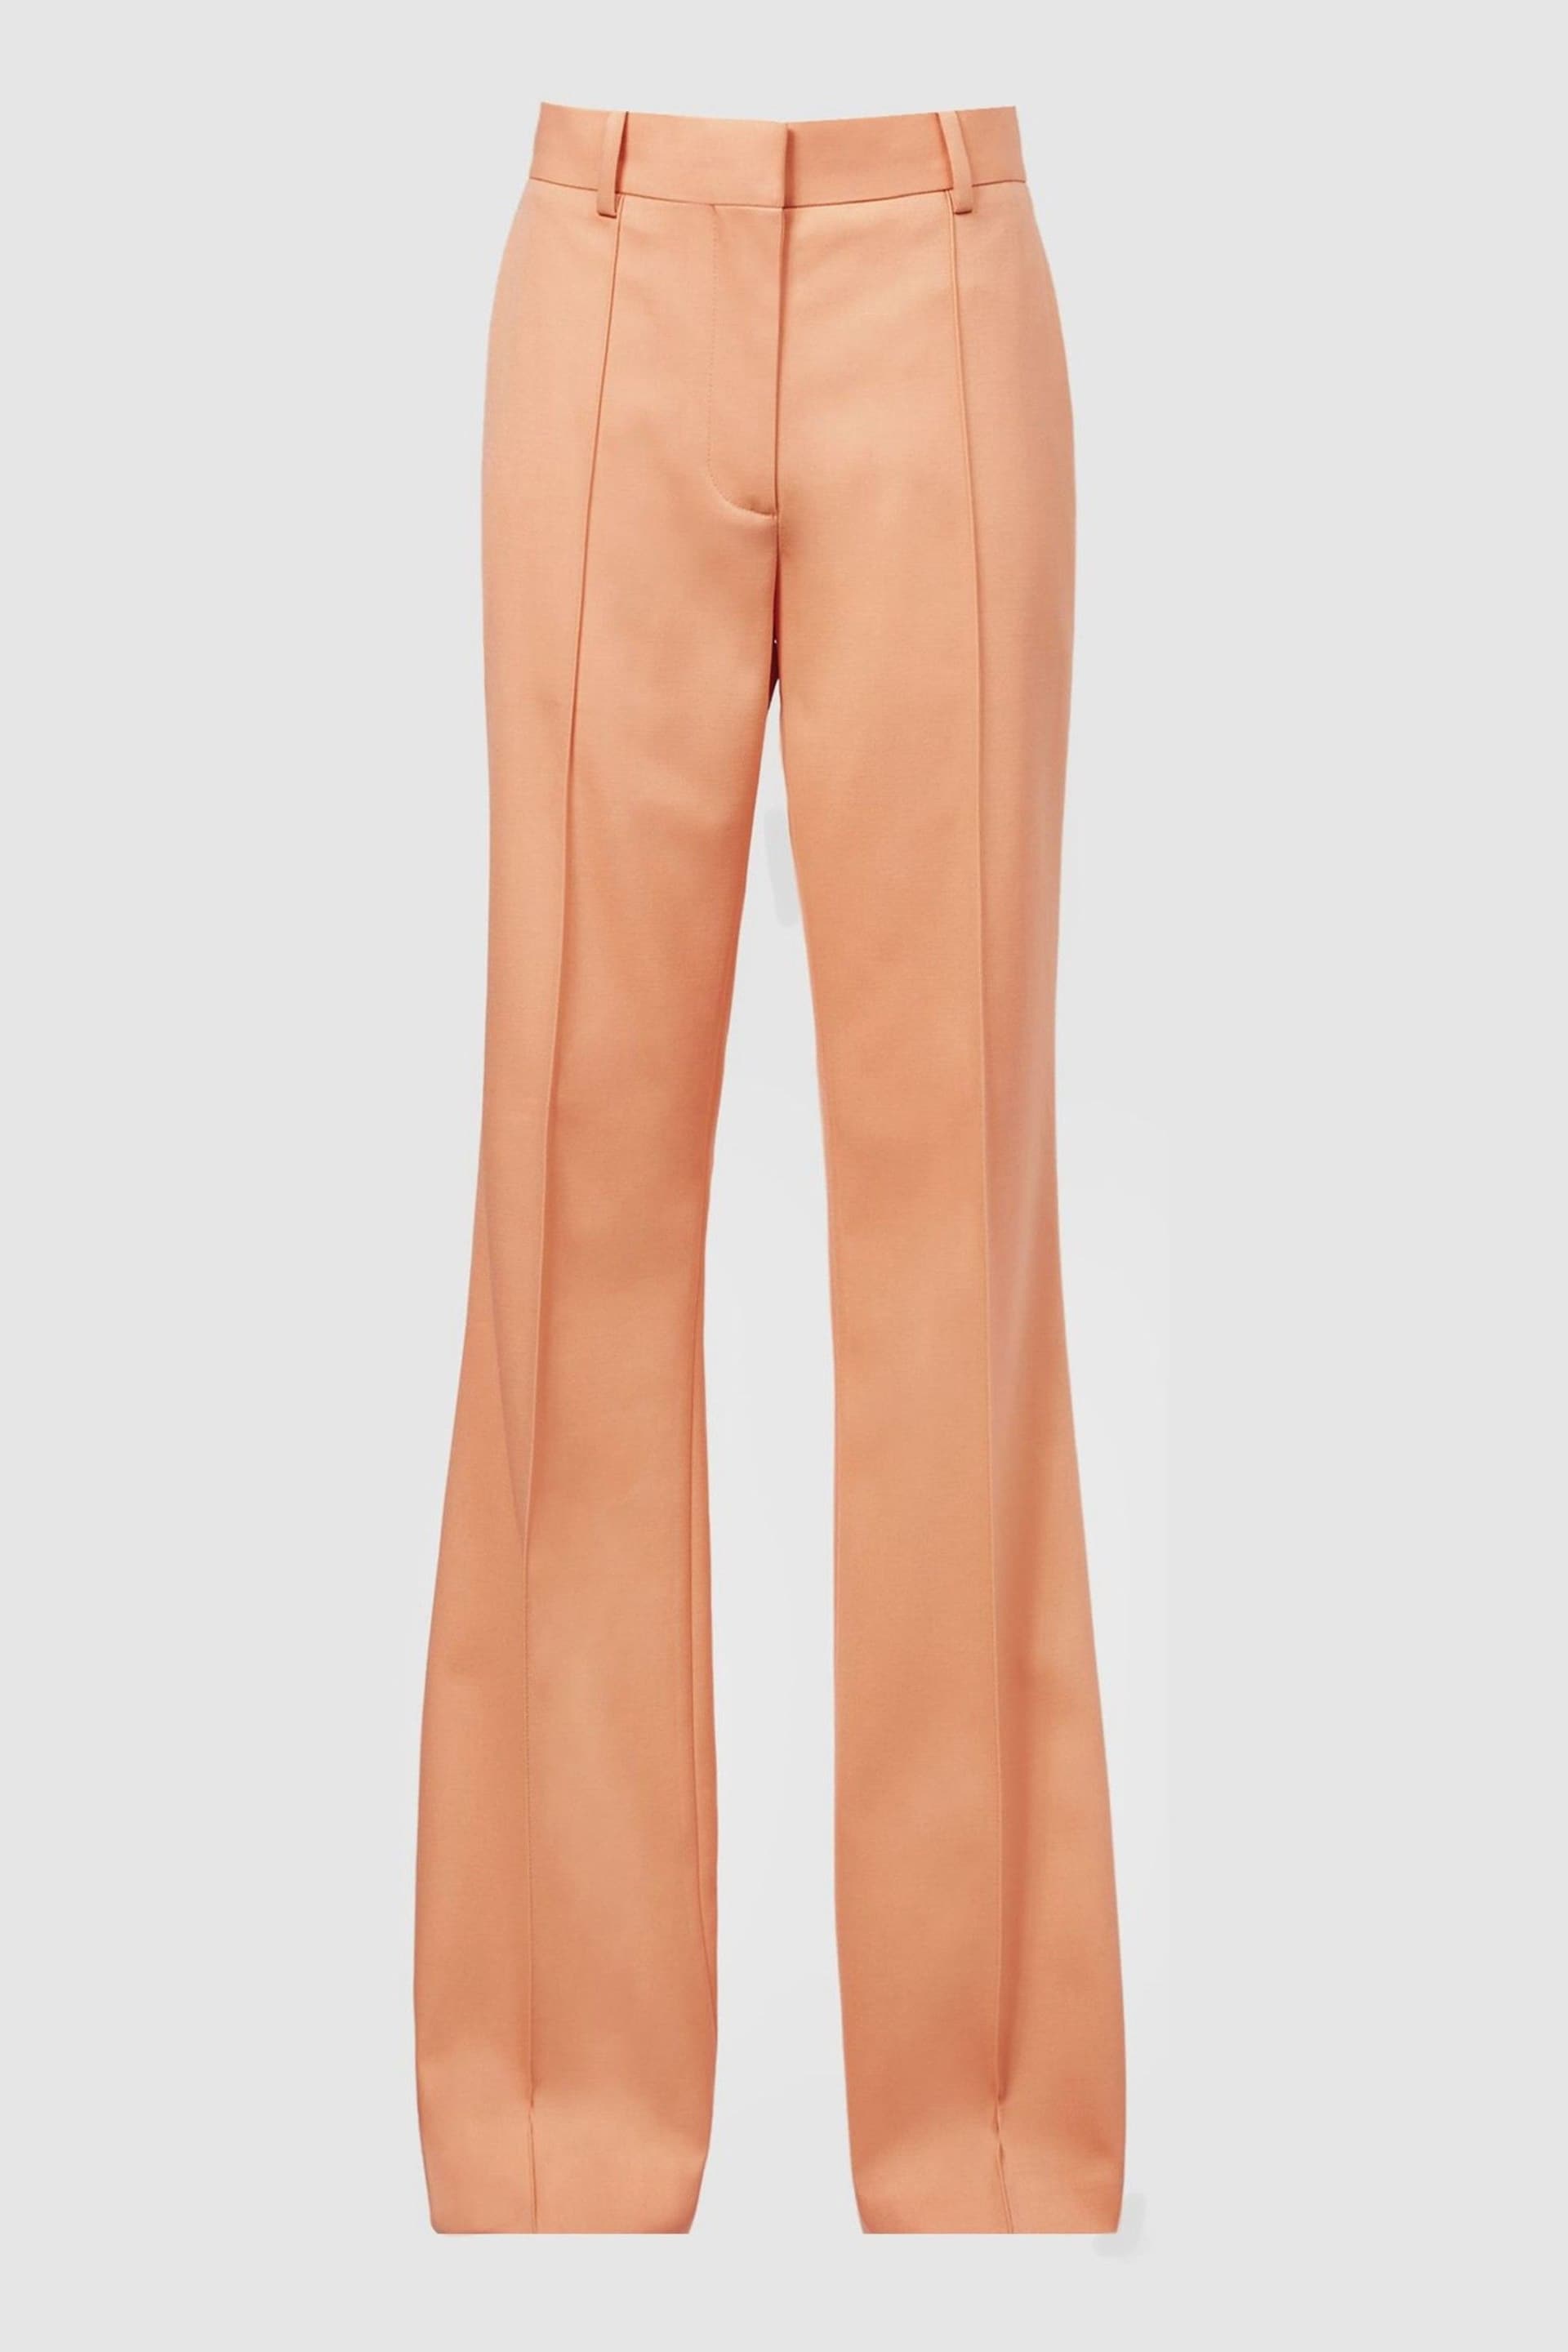 Reiss Orange Emmy Wide Leg Tailored Trousers - Image 2 of 7